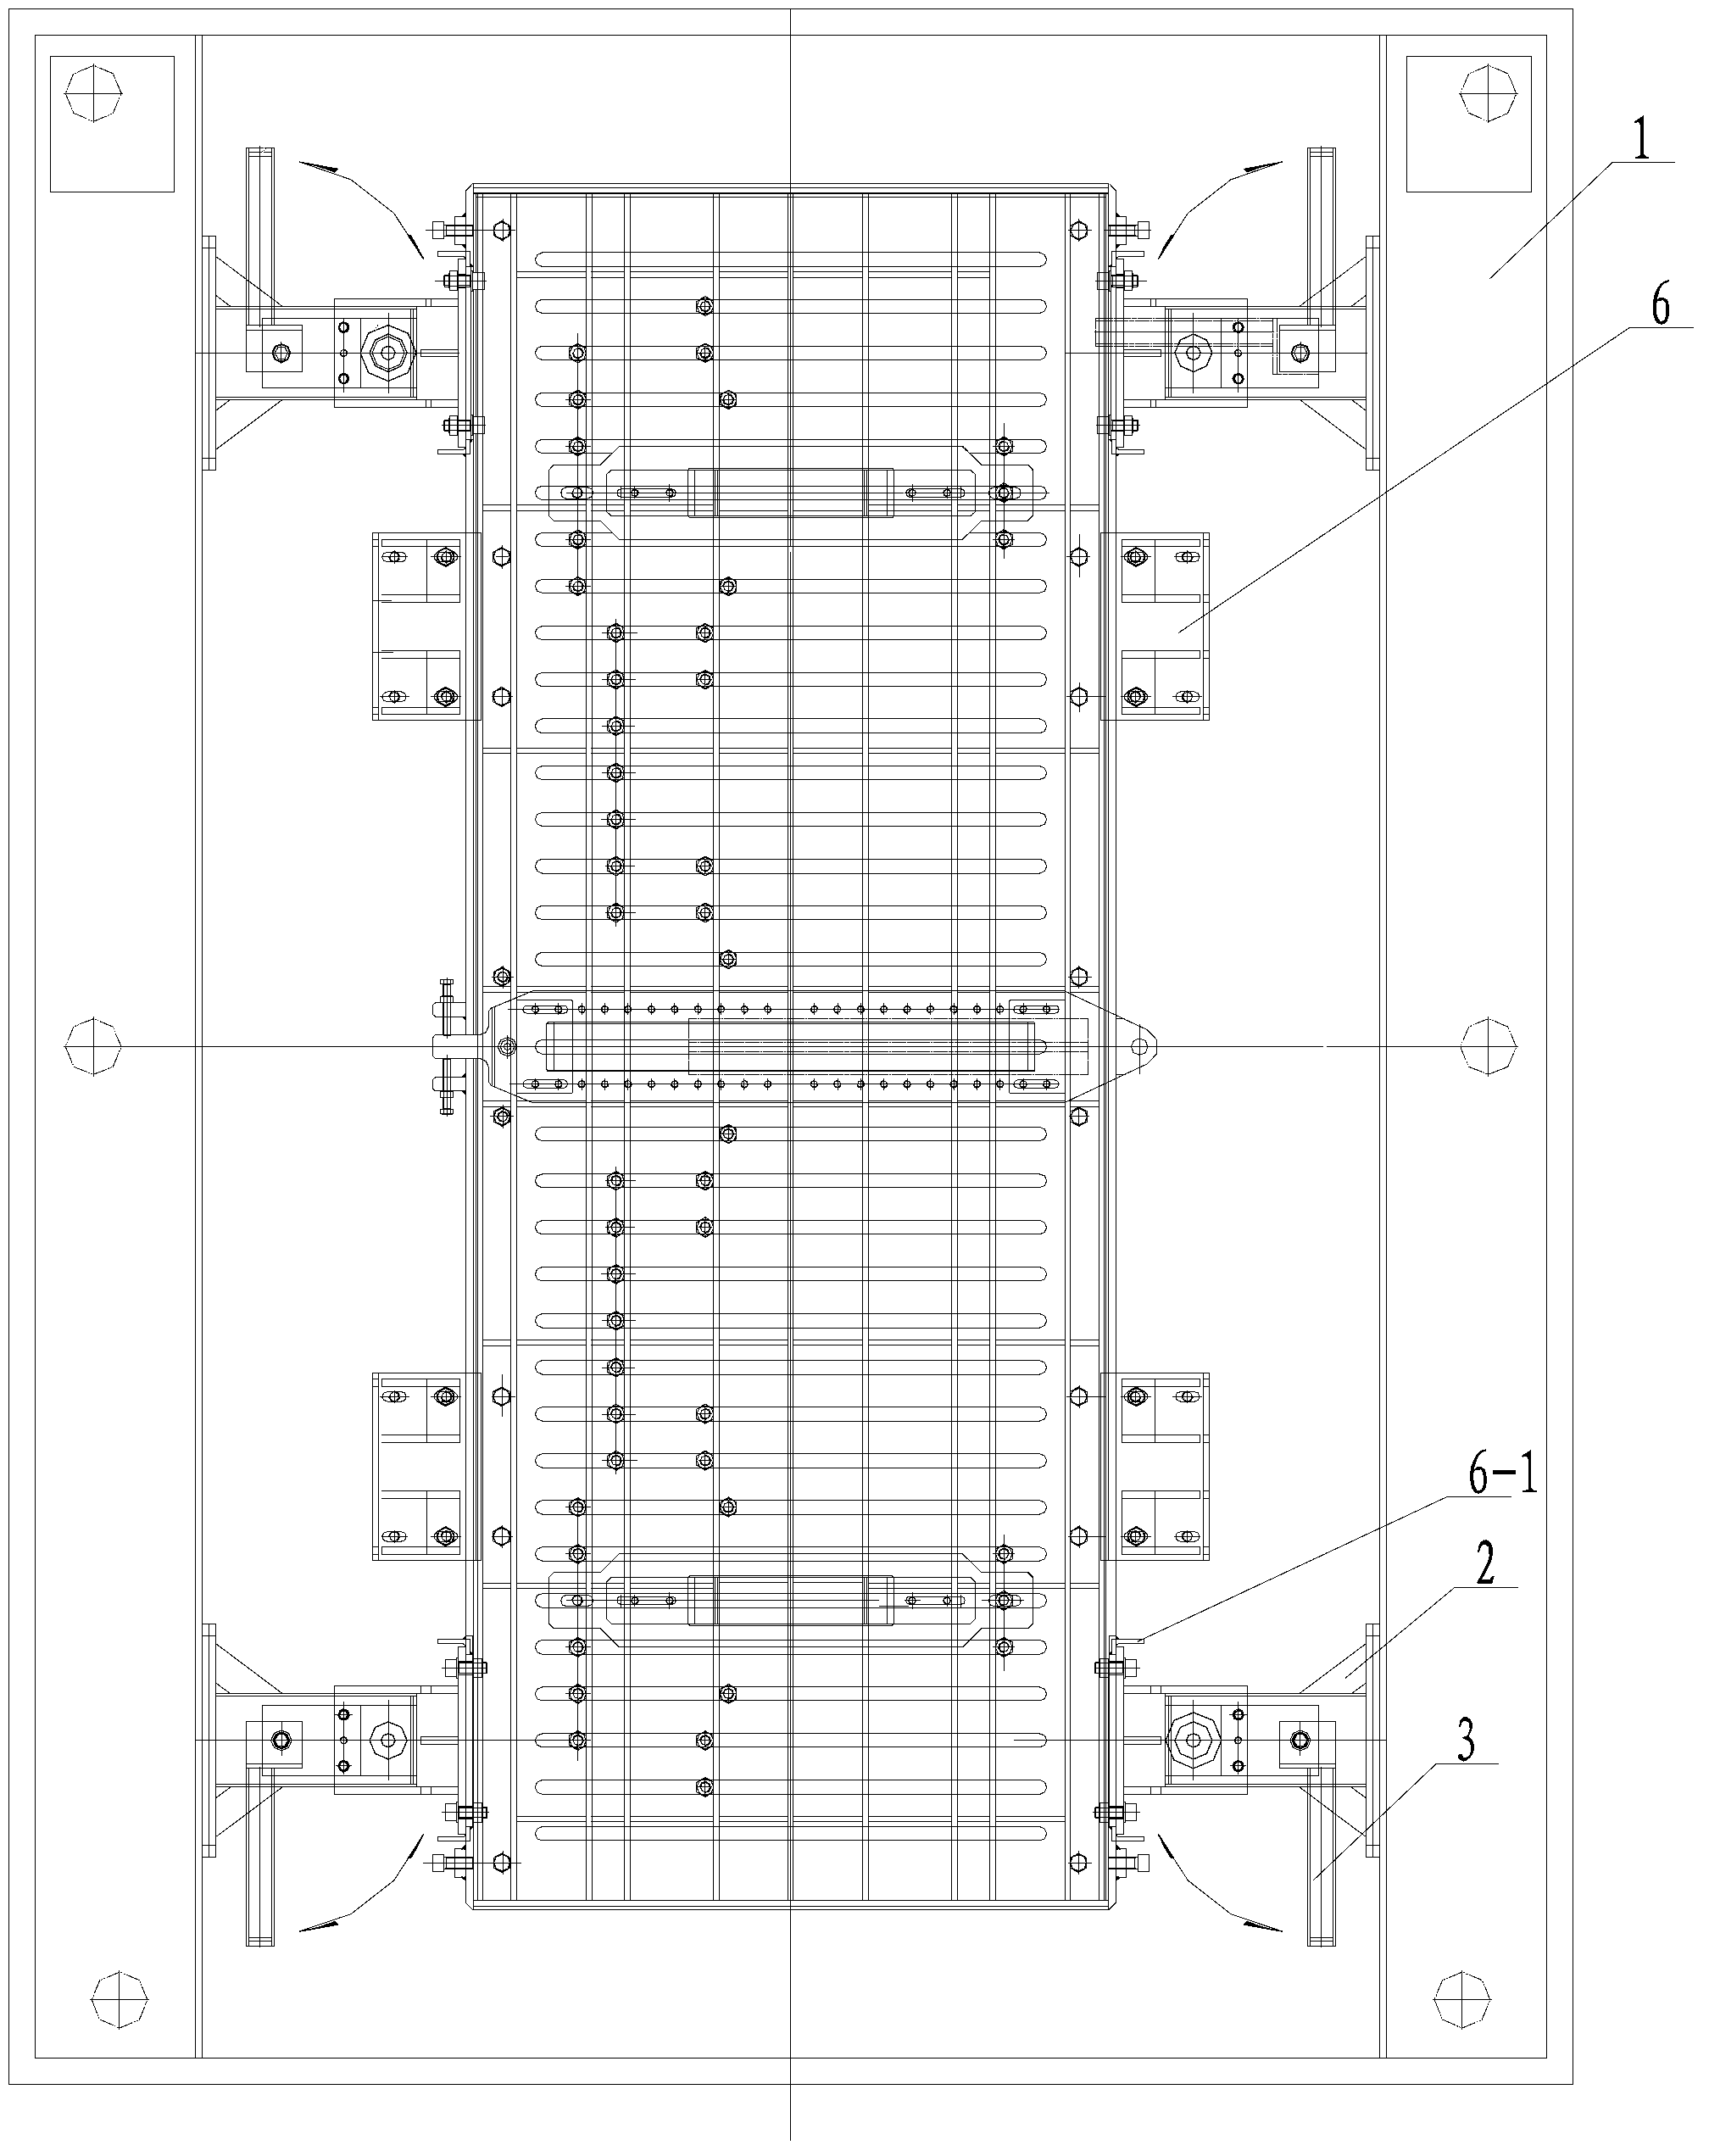 Water-cutter cutting forming assembly for elbow workpiece